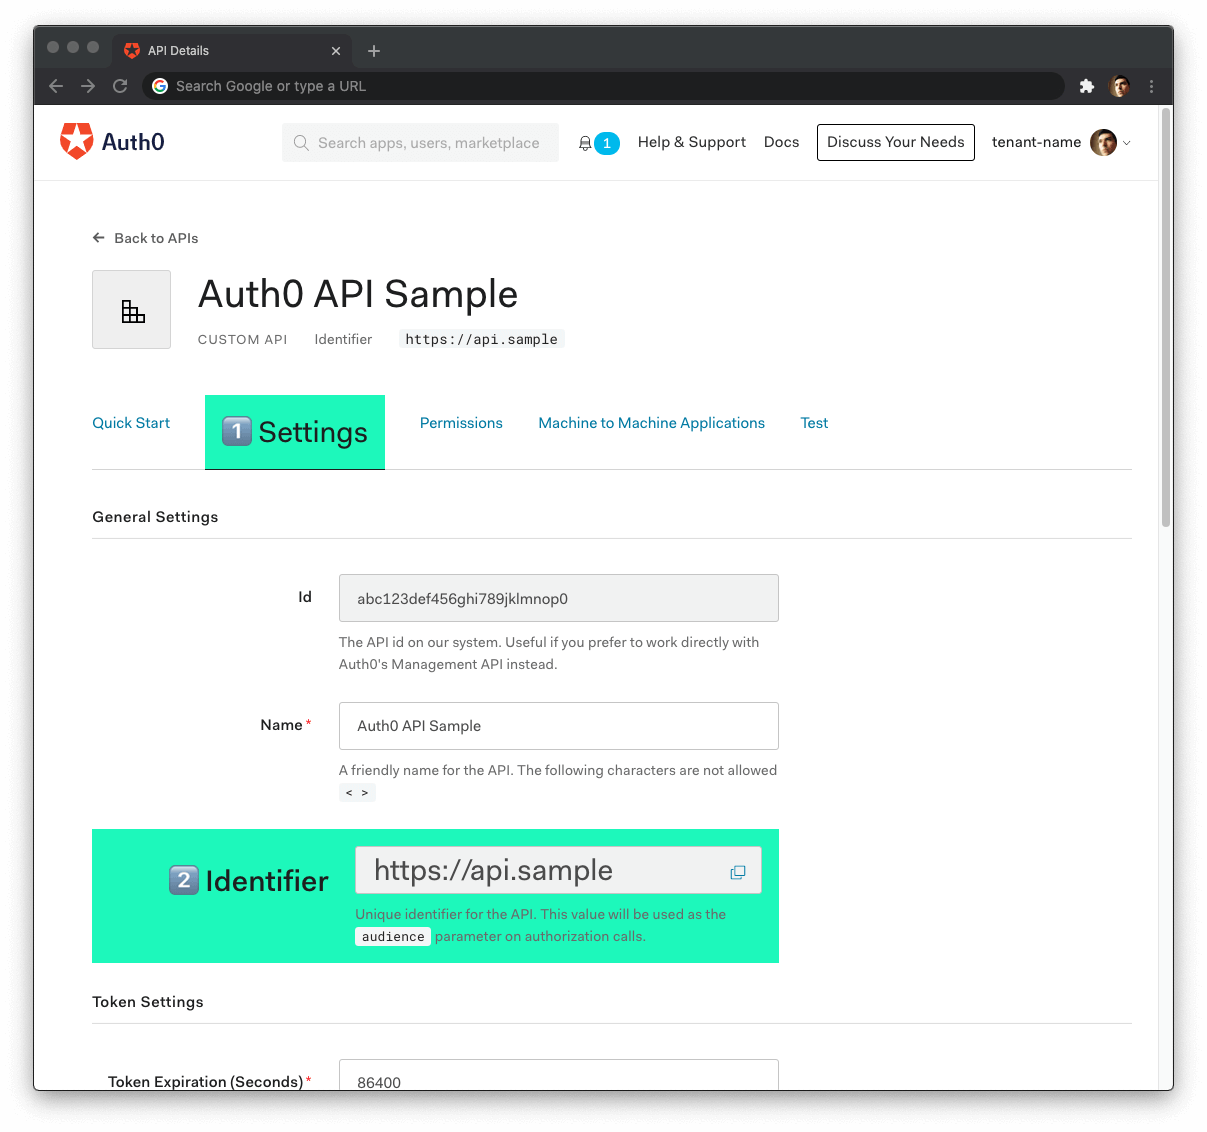 Get the Auth0 Audience to configure an API